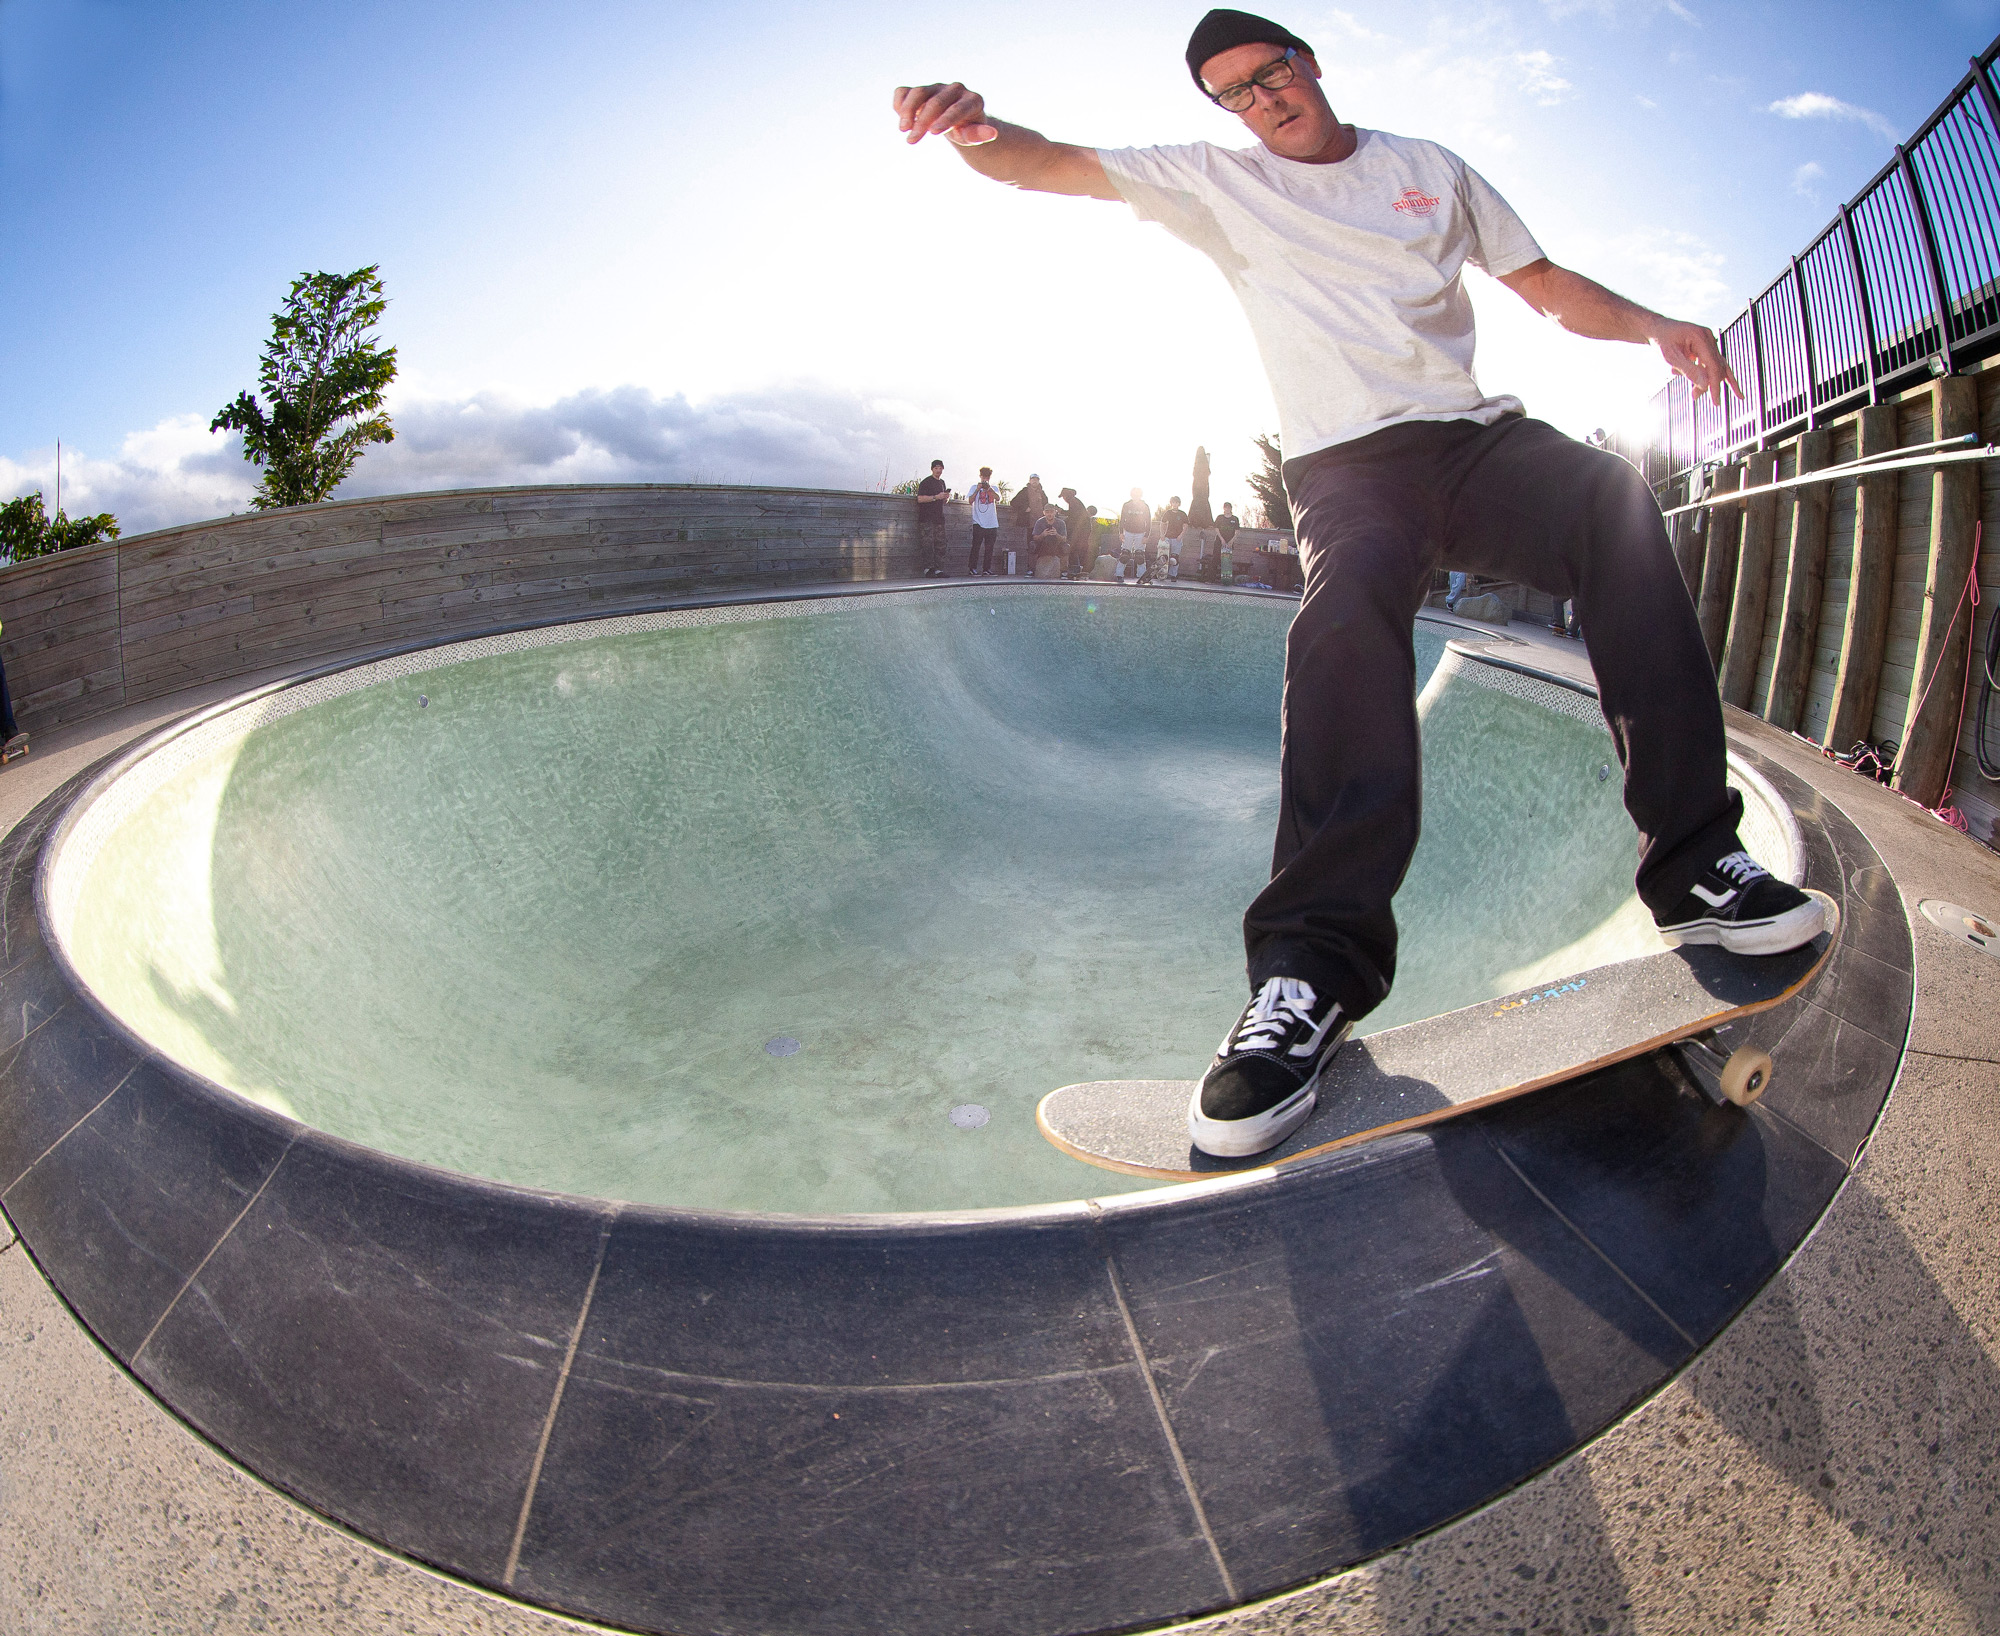 Andrew Morrison, Smith grind.